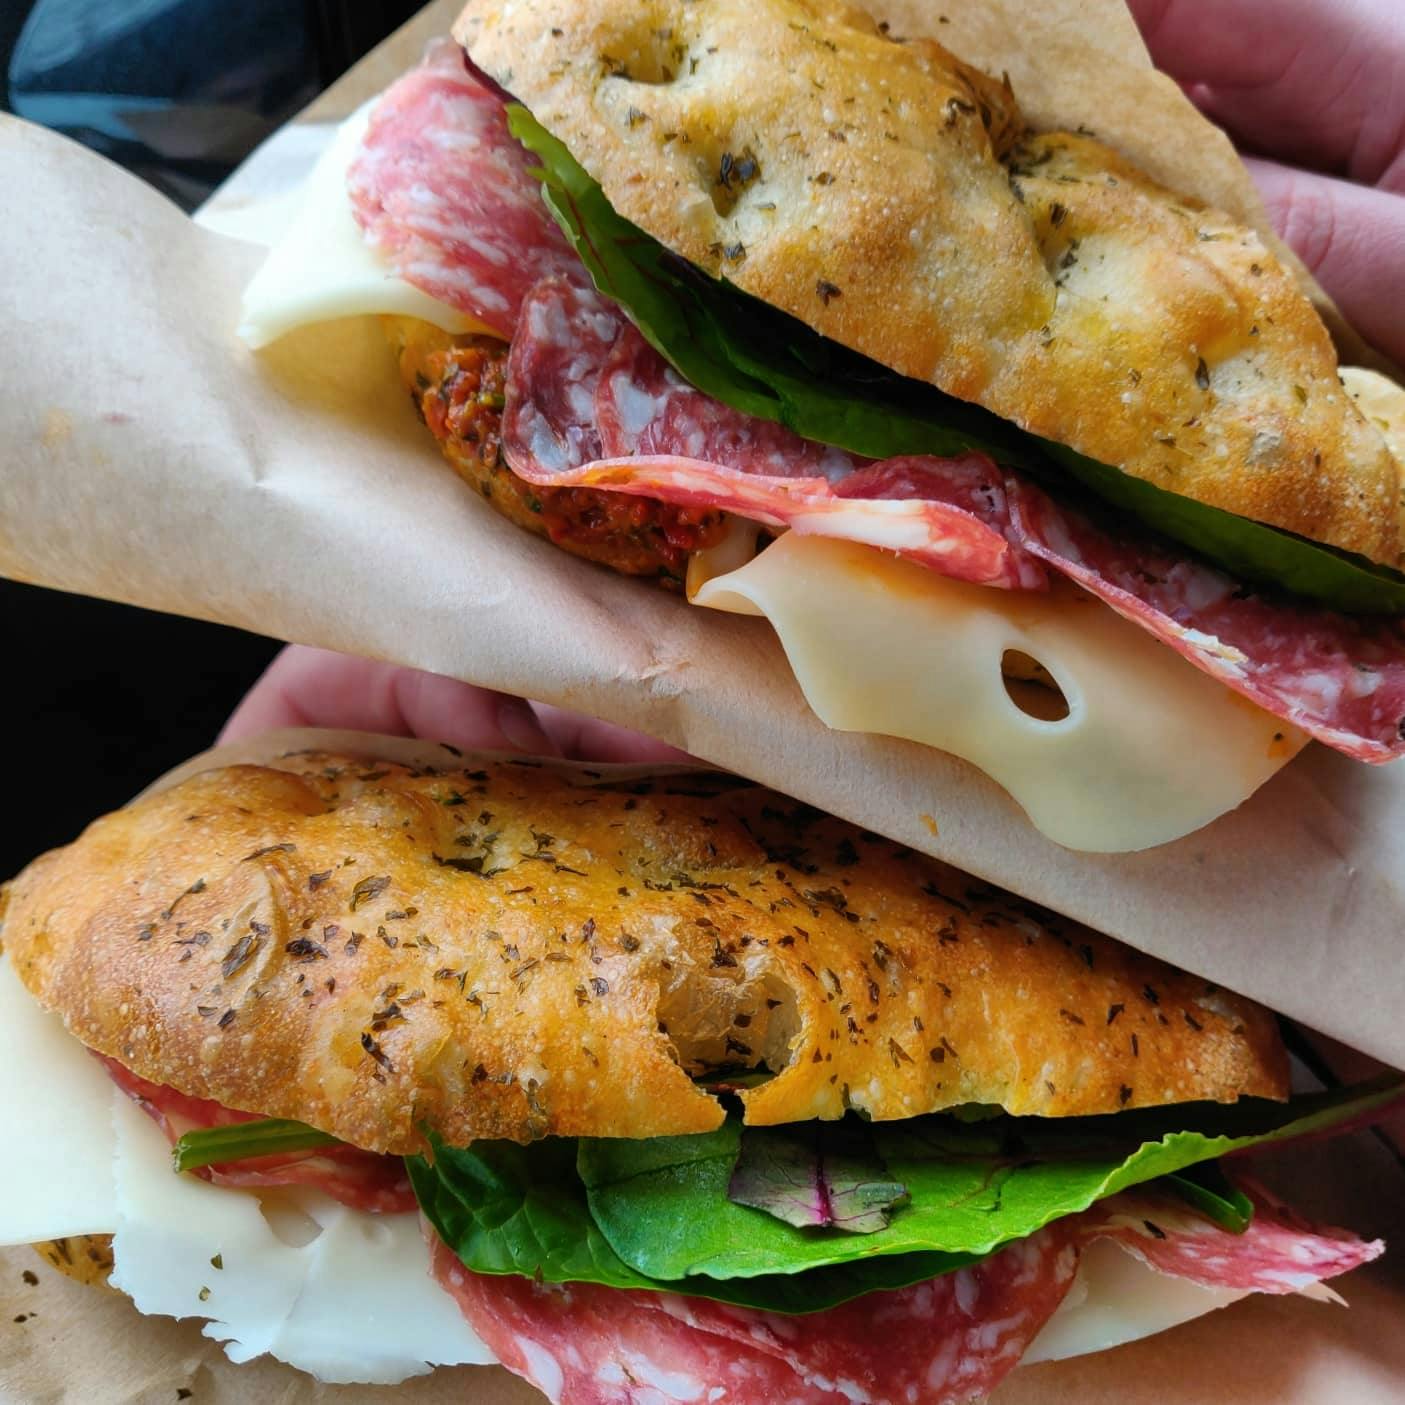 Two loaded sandwiches from Bragazzi's on Abbeydale Road